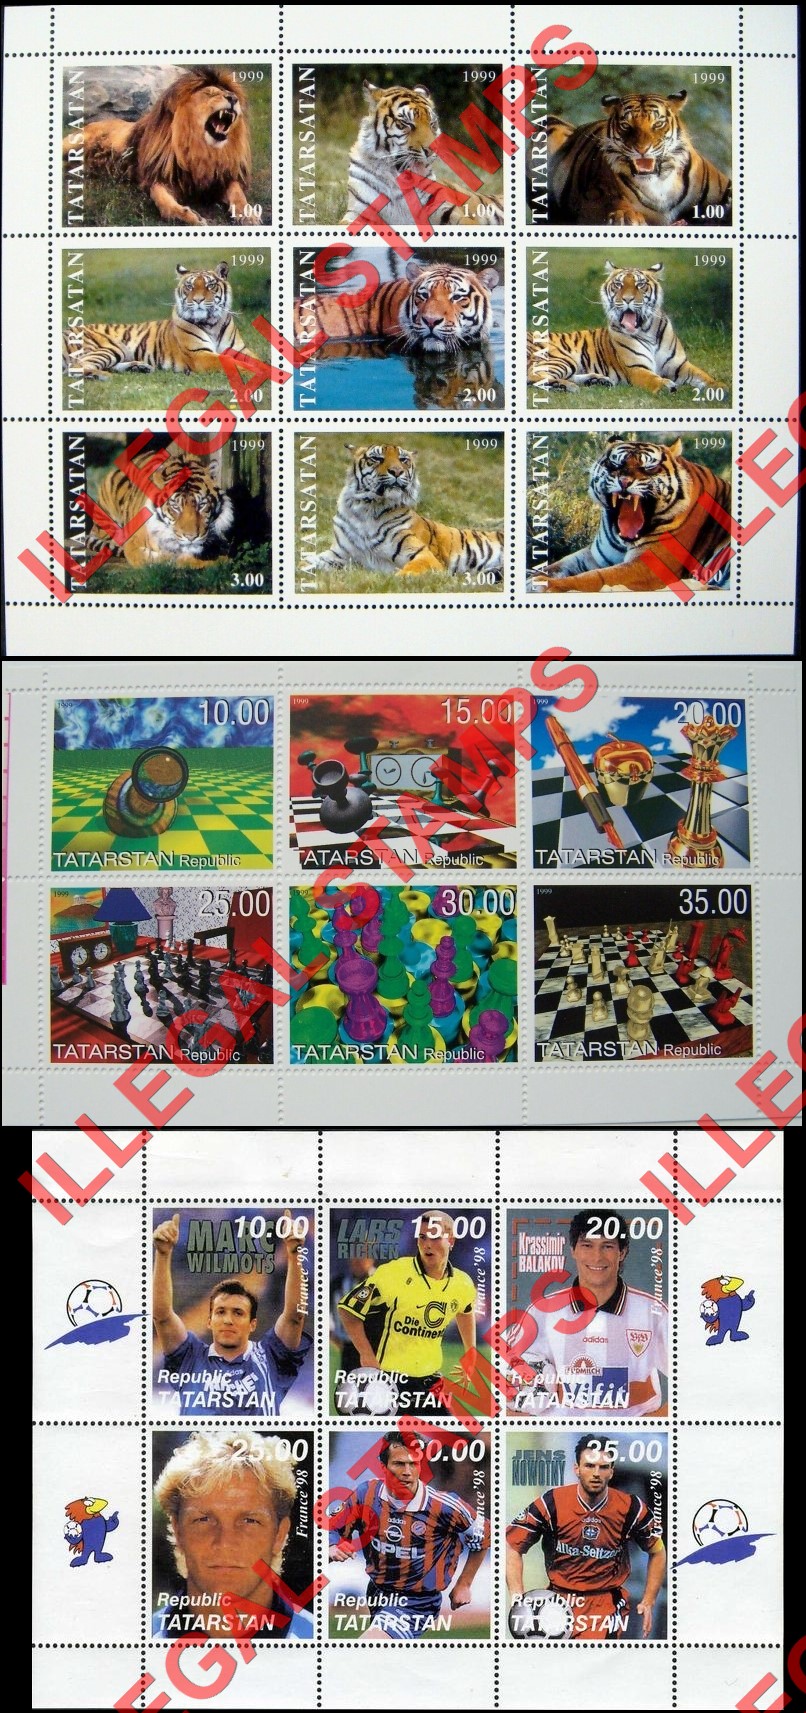 Republic of Tatarstan 1999 Counterfeit Illegal Stamps (Part 2)